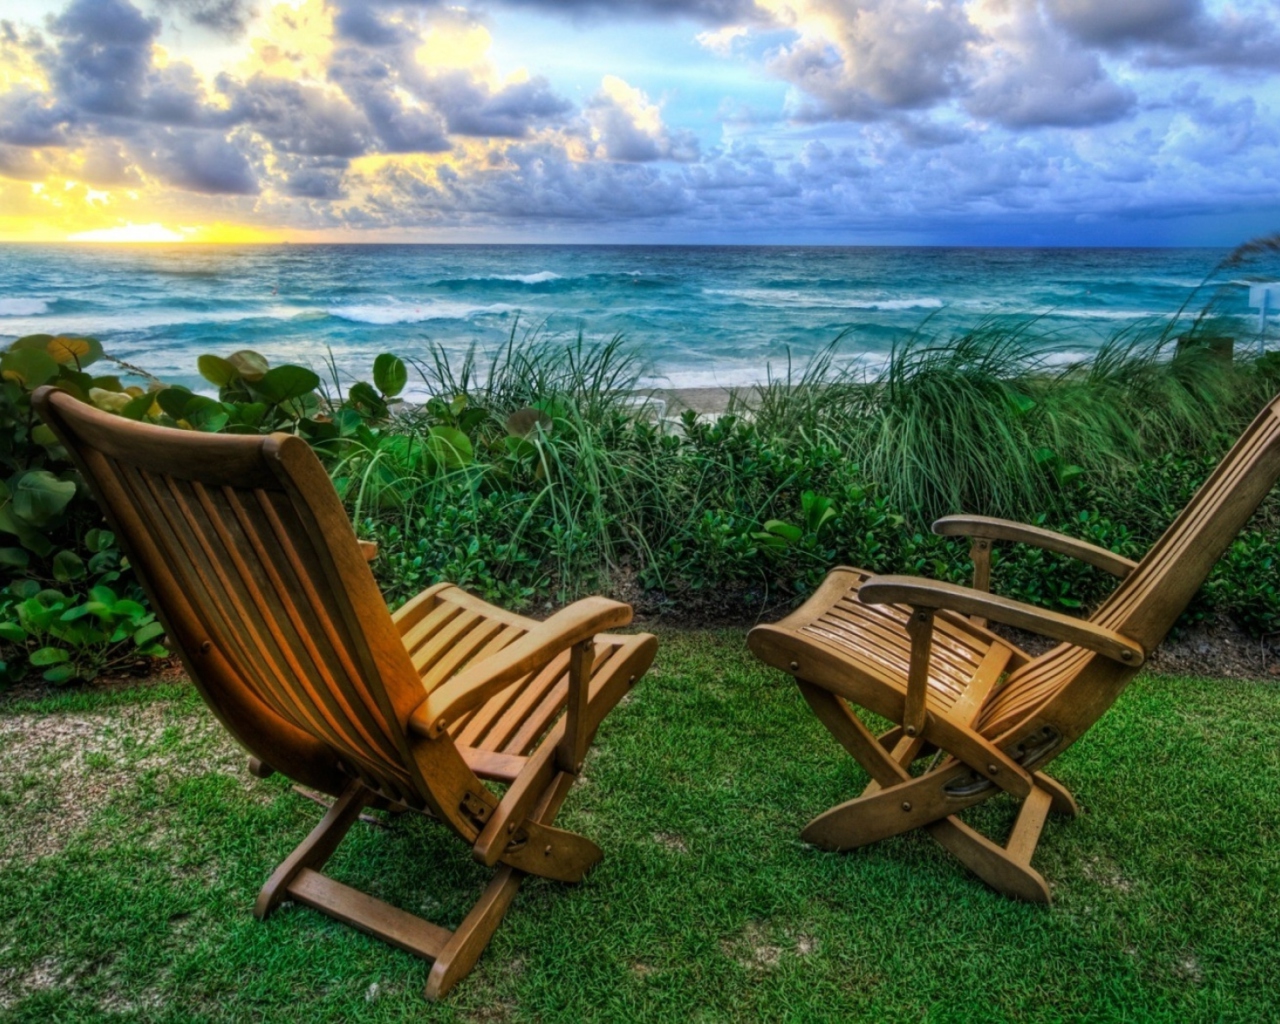 Chairs With Sea View wallpaper 1280x1024